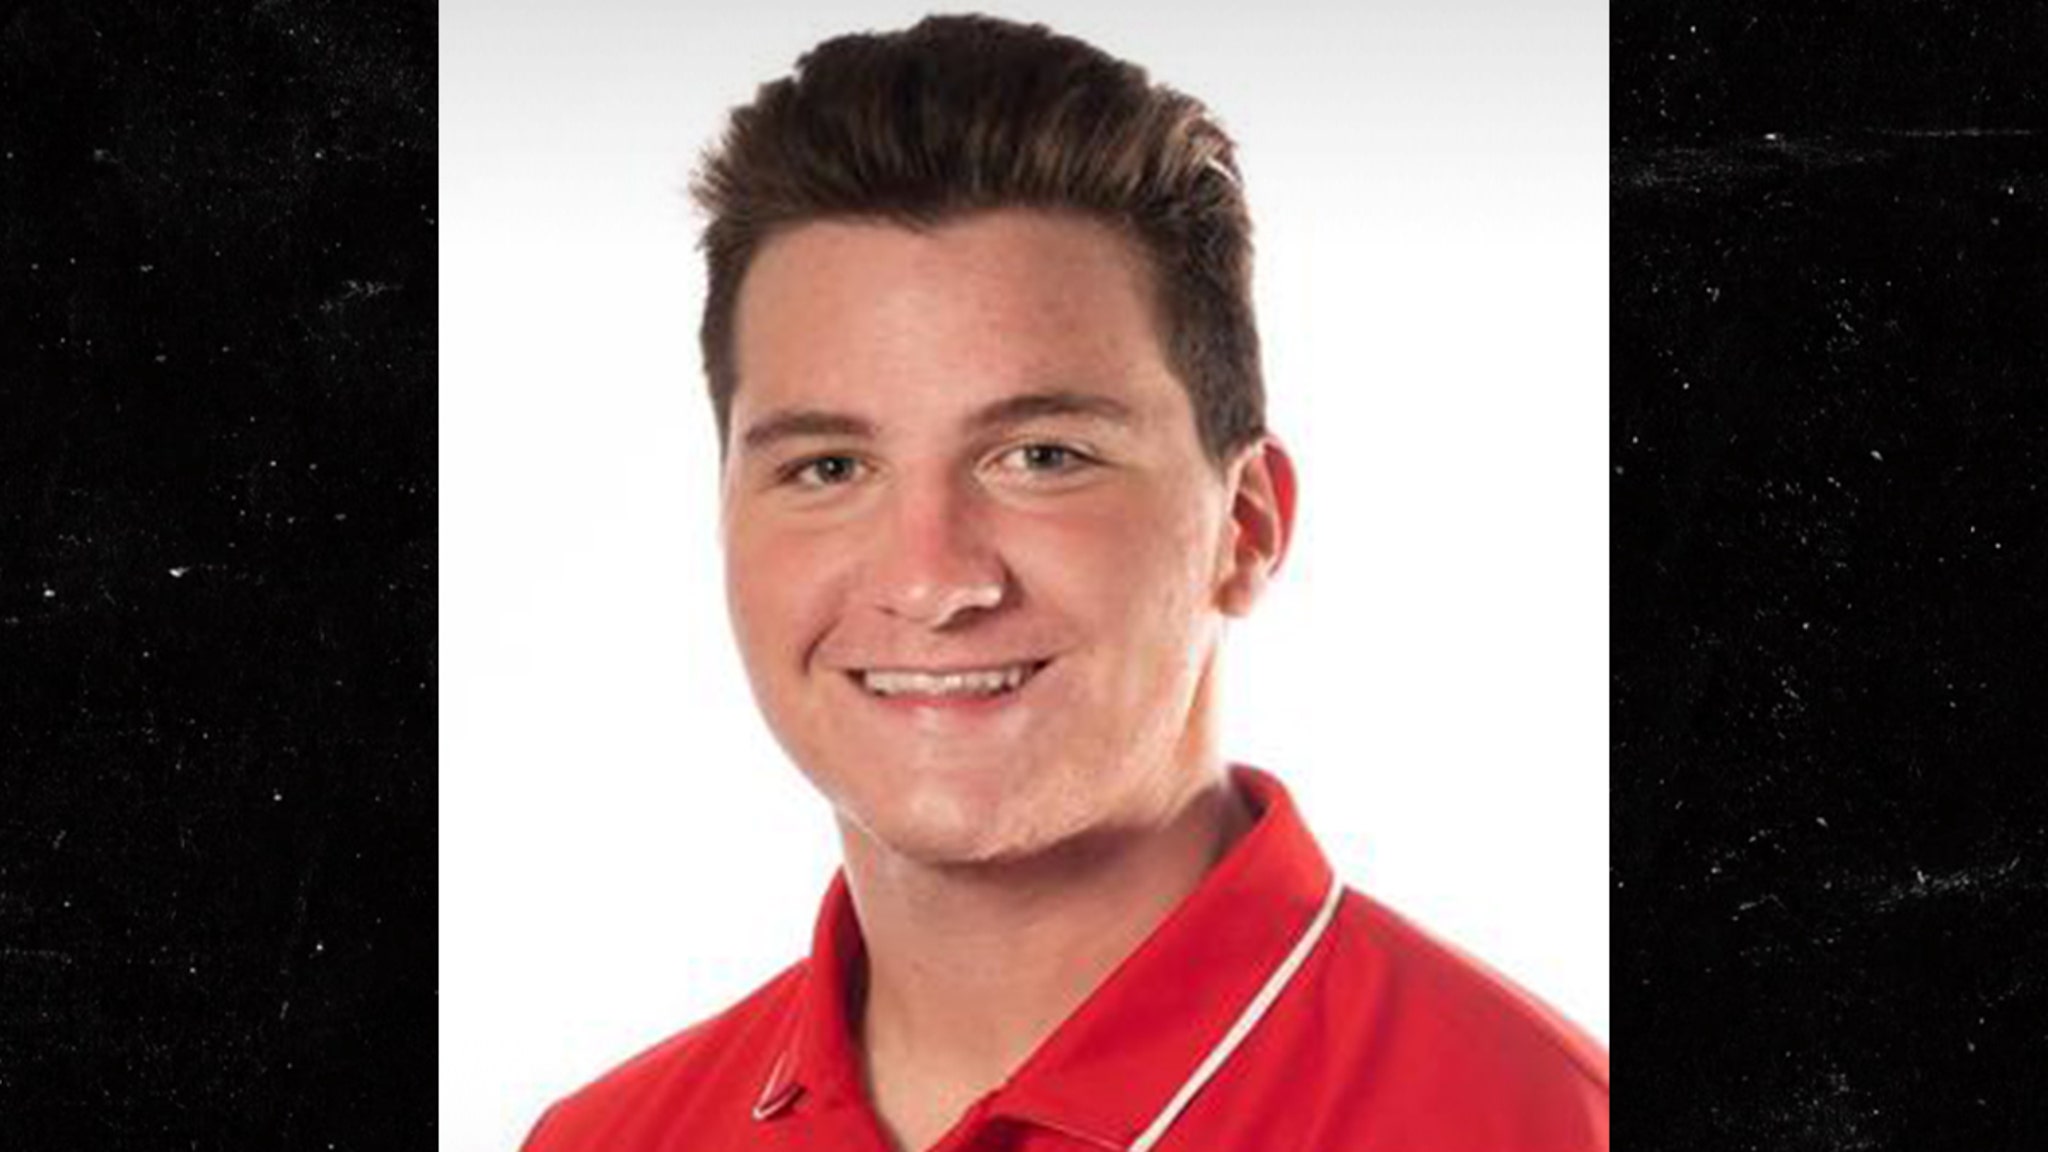 UNLV’s Ryan Keeler Battled Nausea, Sickness In Days Before Death, Police Report States